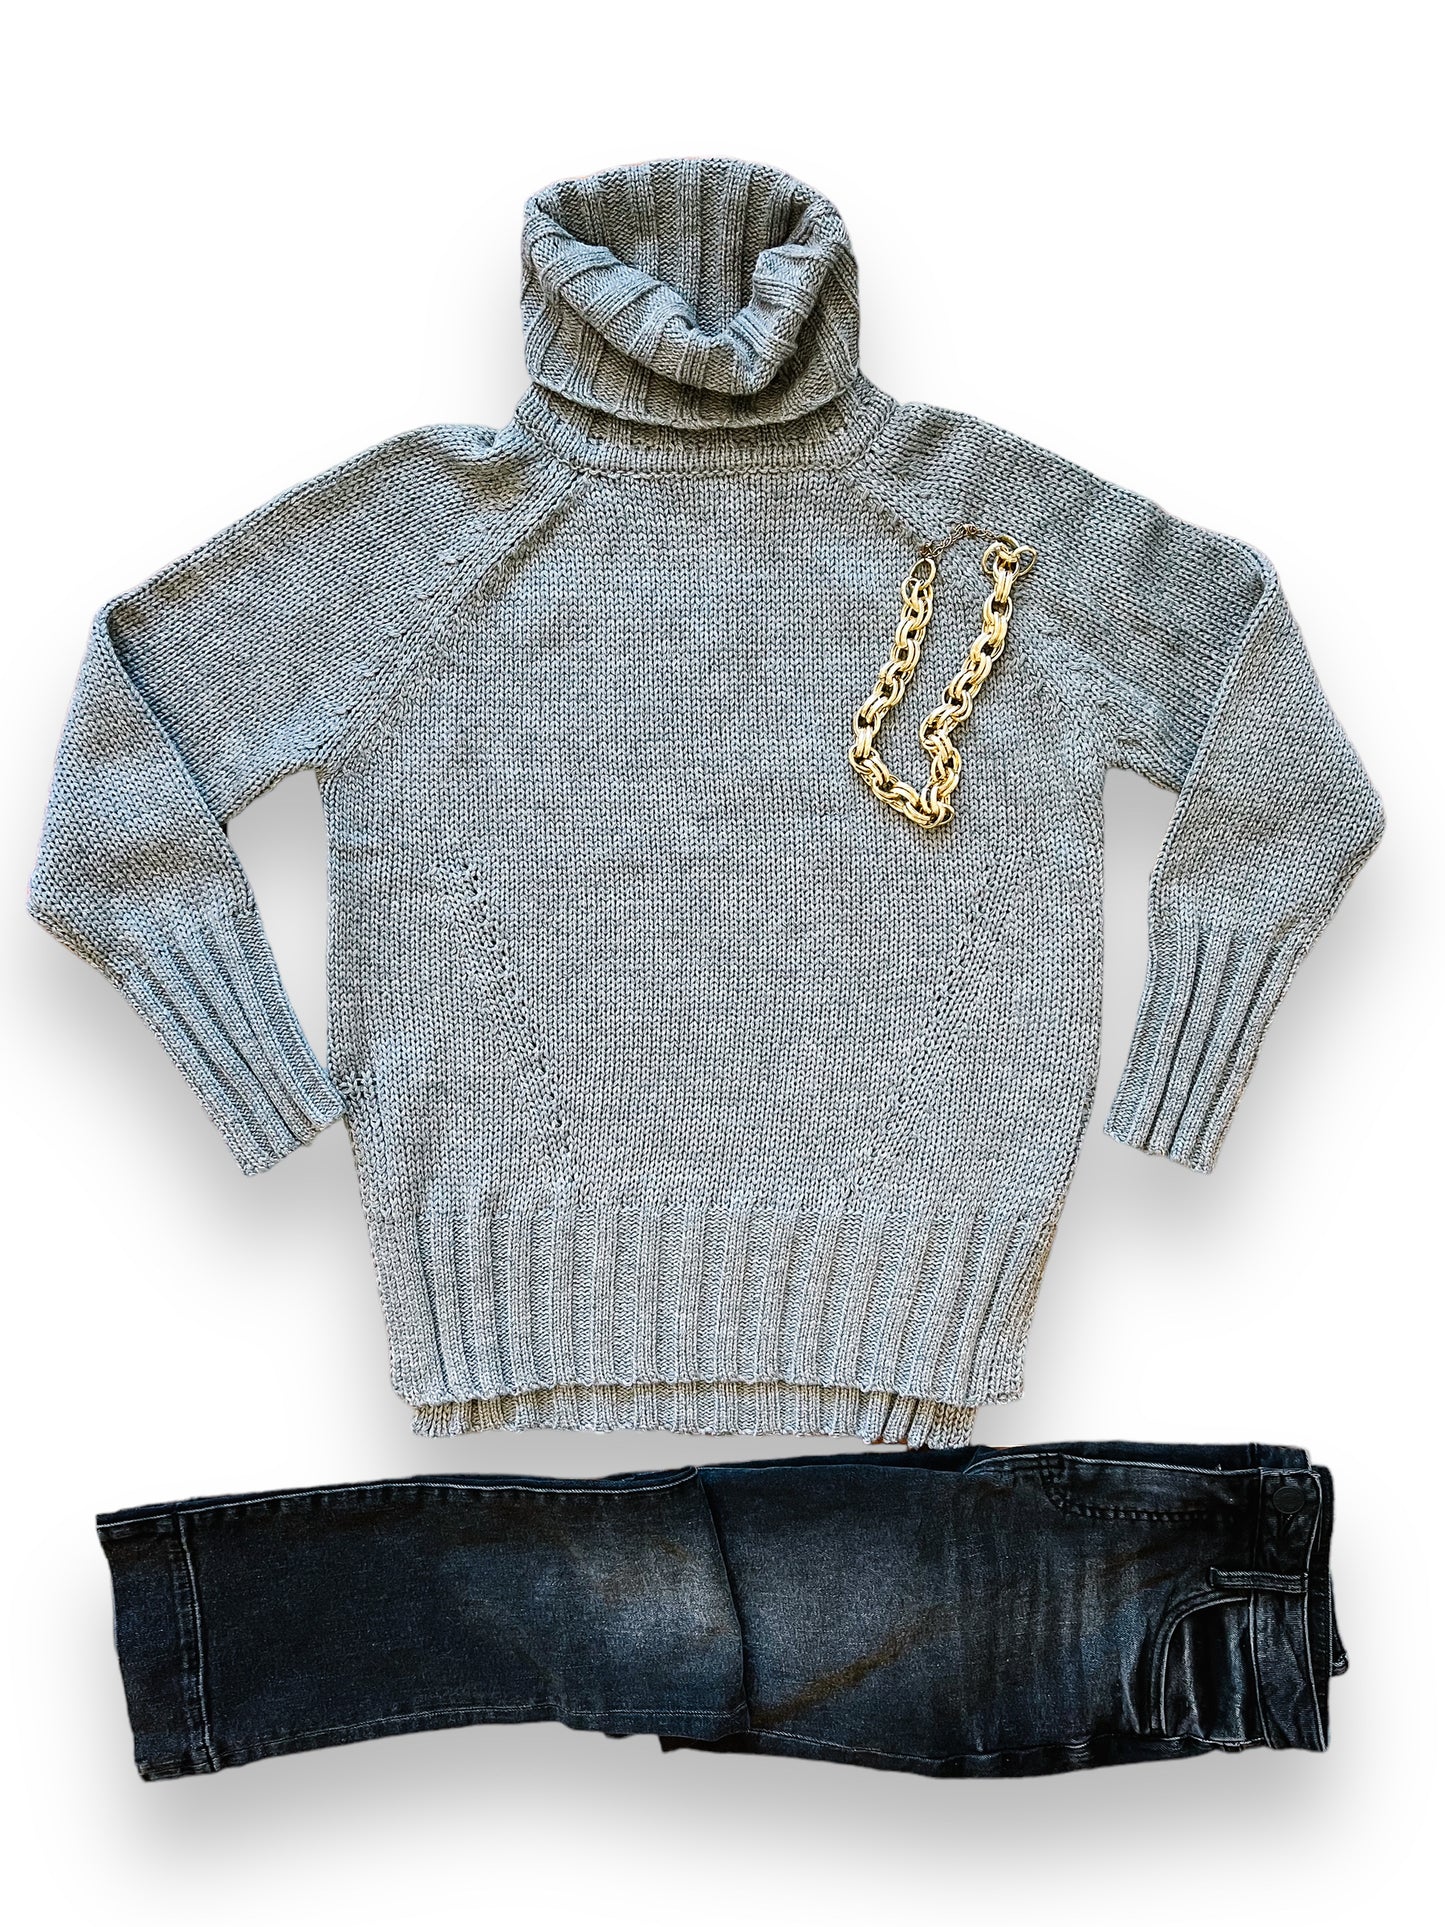 Shades of Gray sweater